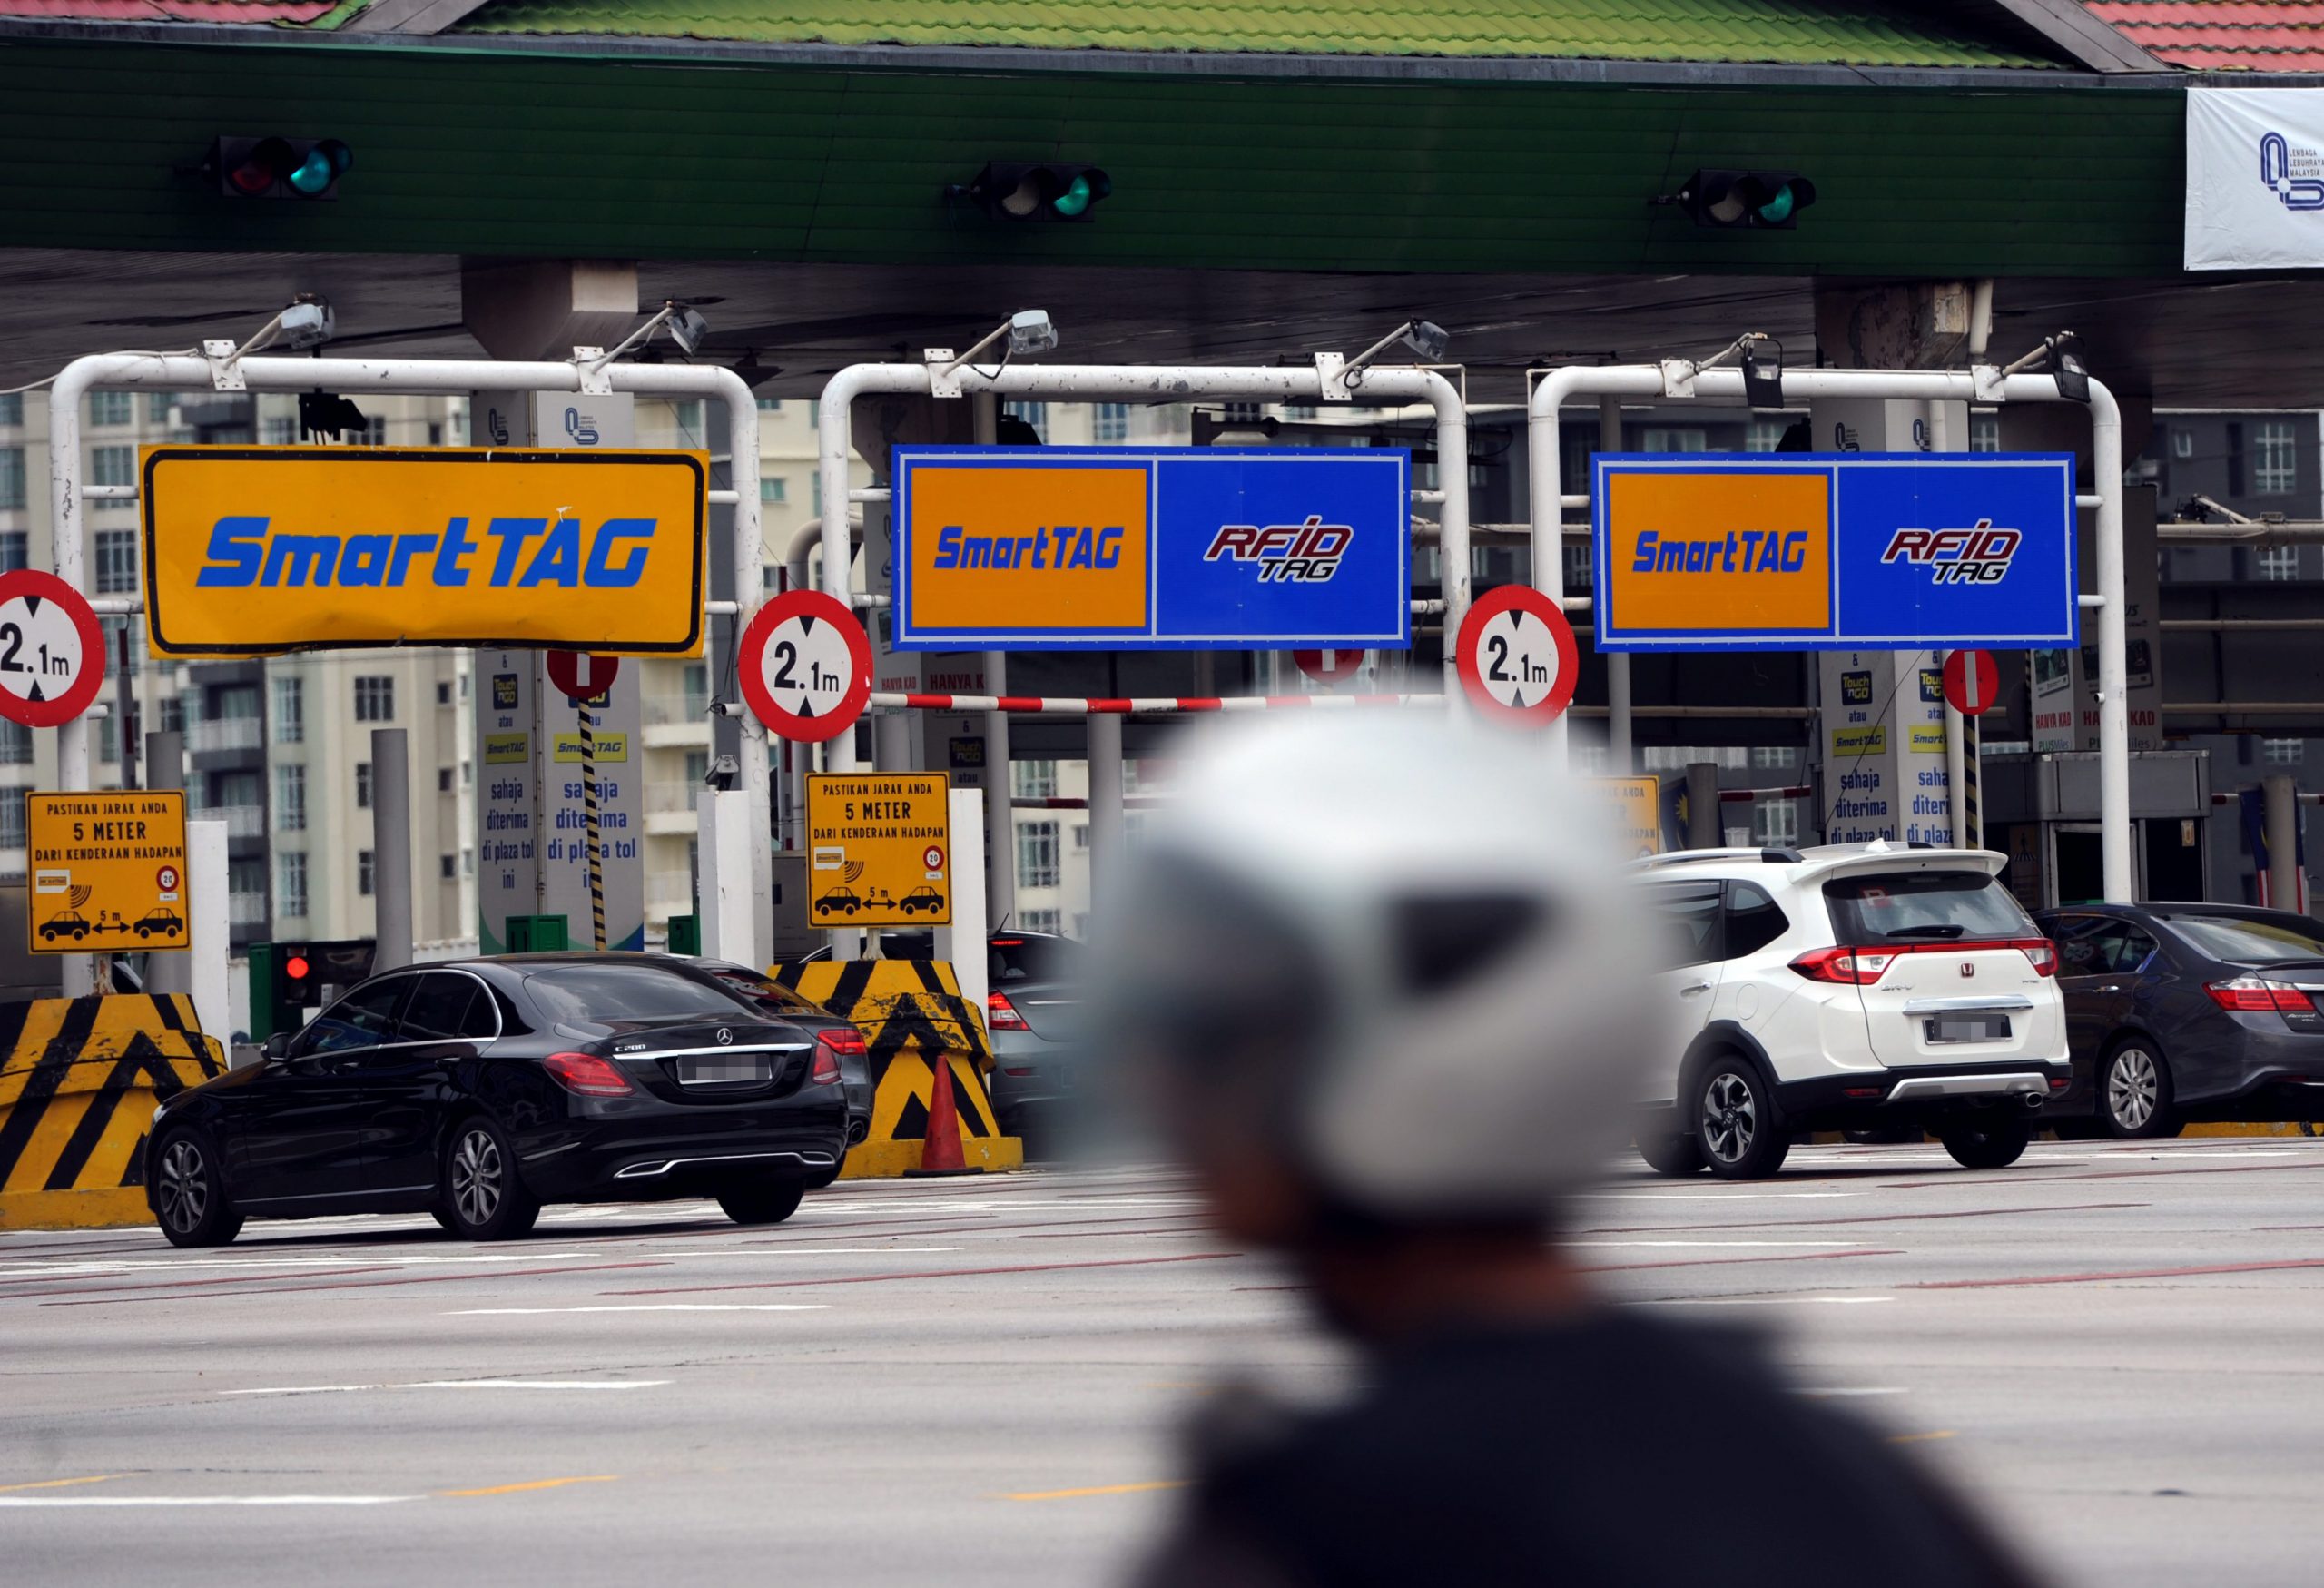 The government is mulling on the removal of toll bars & boom gates by 2025. Image credit: The Malaysian Reserve